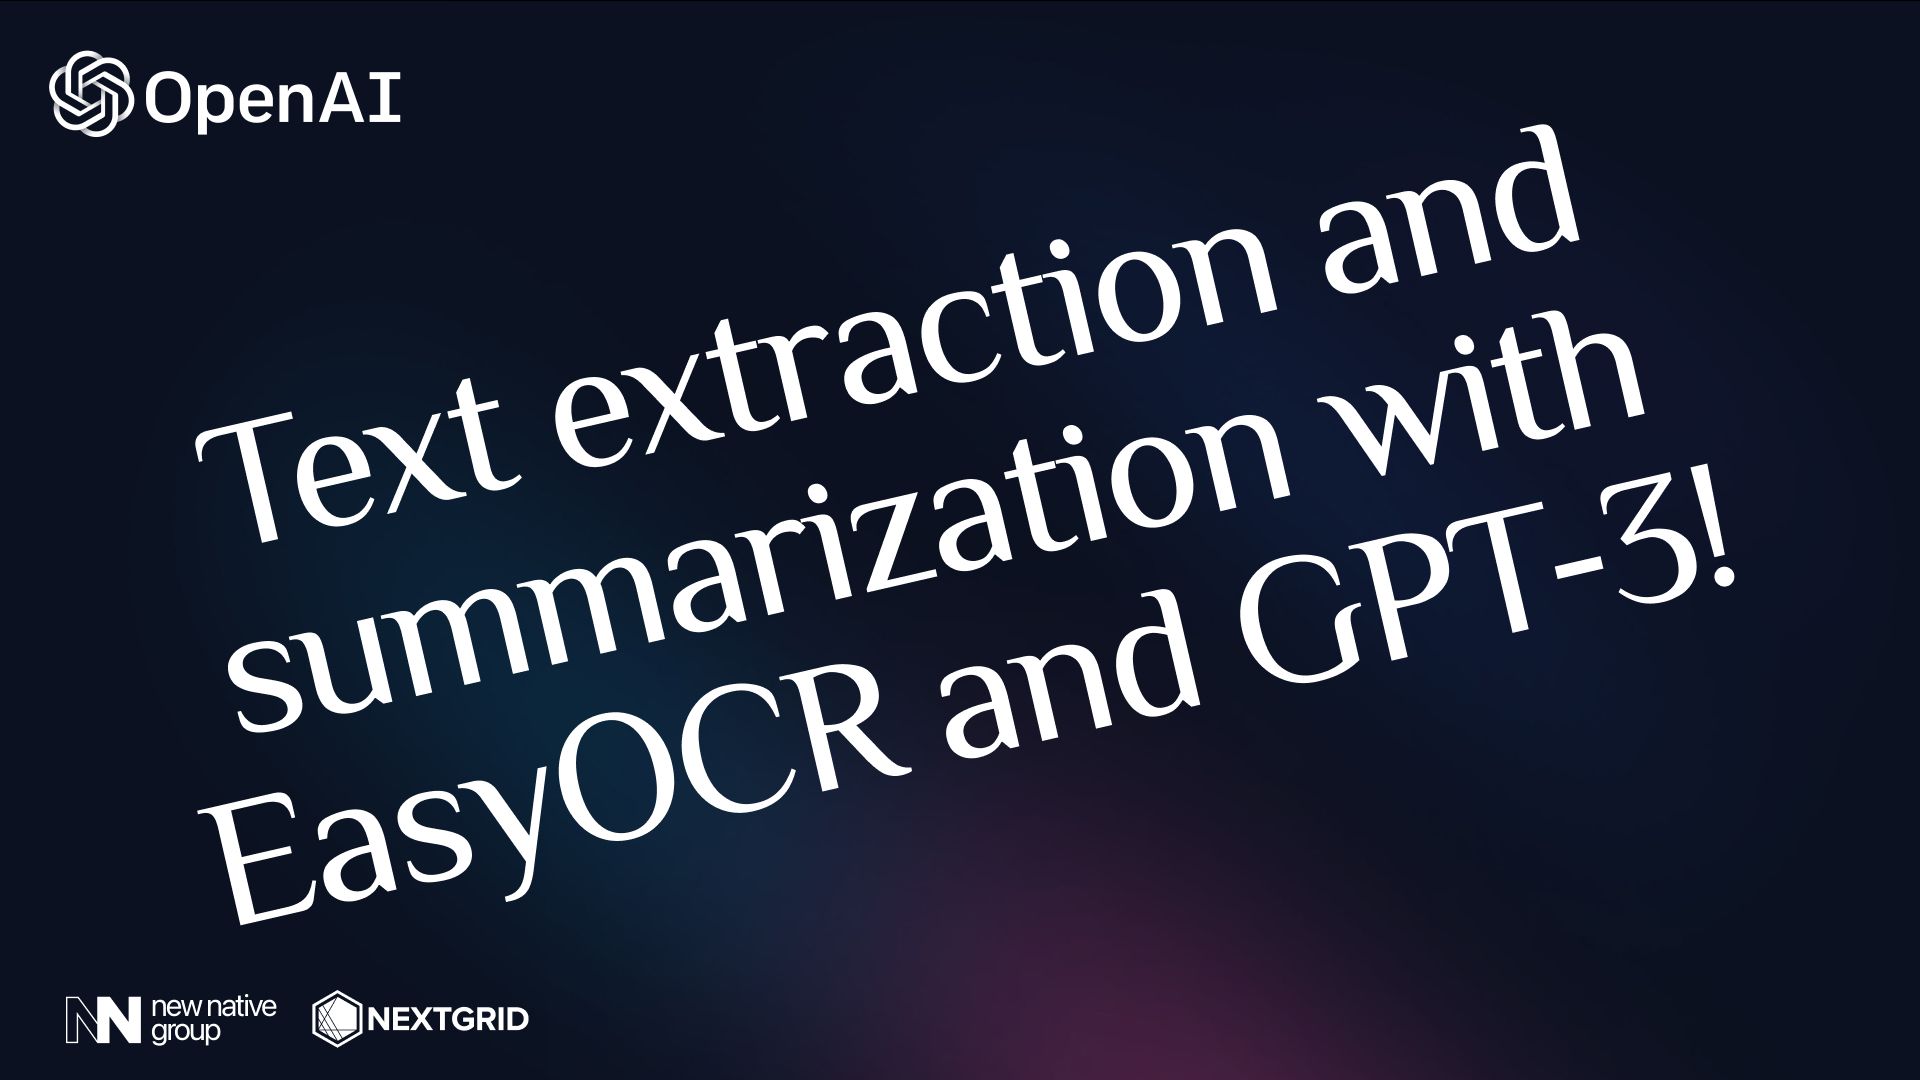 EasyOCR tutorial: Text extraction and summarization with EasyOCR and GPT-3!